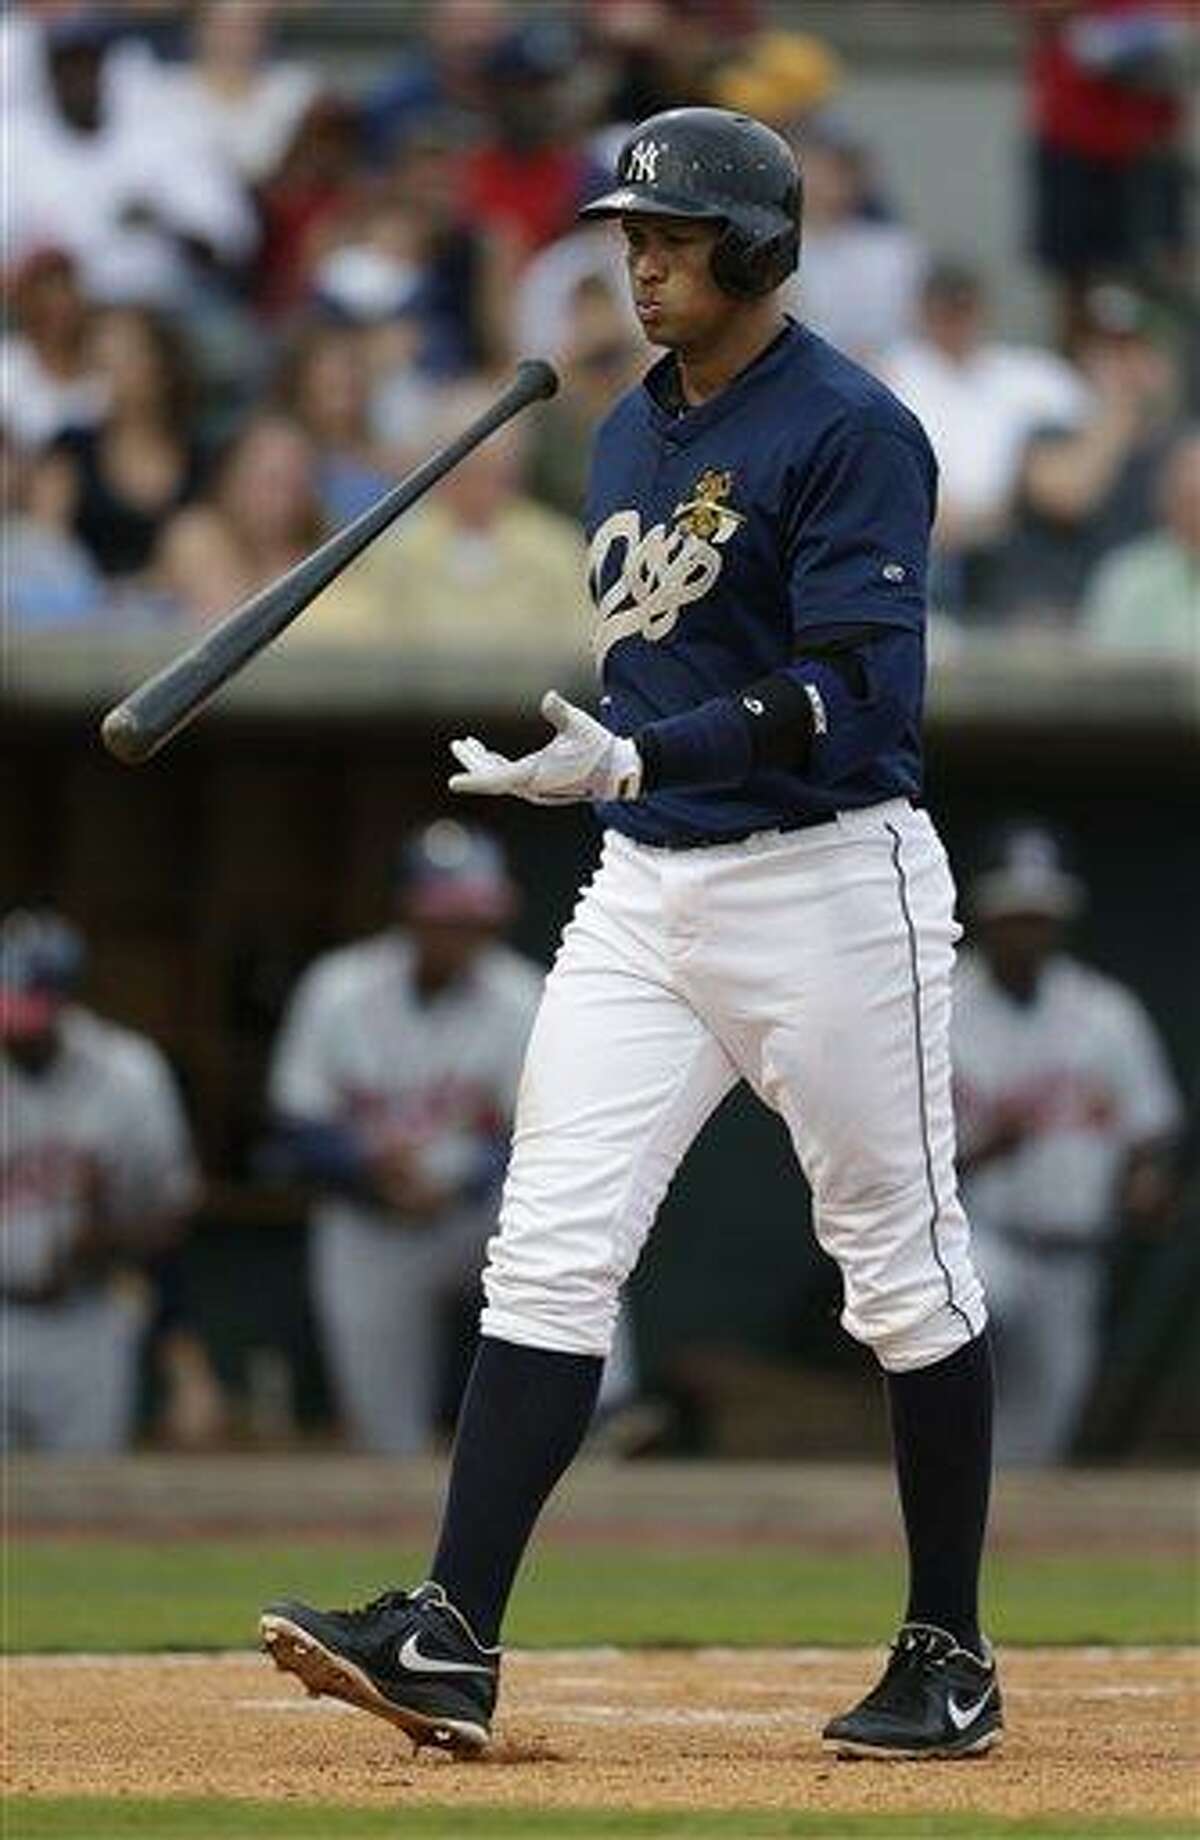 New York Yankees' Alex Rodriguez reacts to being called out on strikes during the third inning in his first rehab game with the Charleston RiverDogs in Charleston, S.C., Tuesday, July 2, 2013. (AP Photo/Chuck Burton)